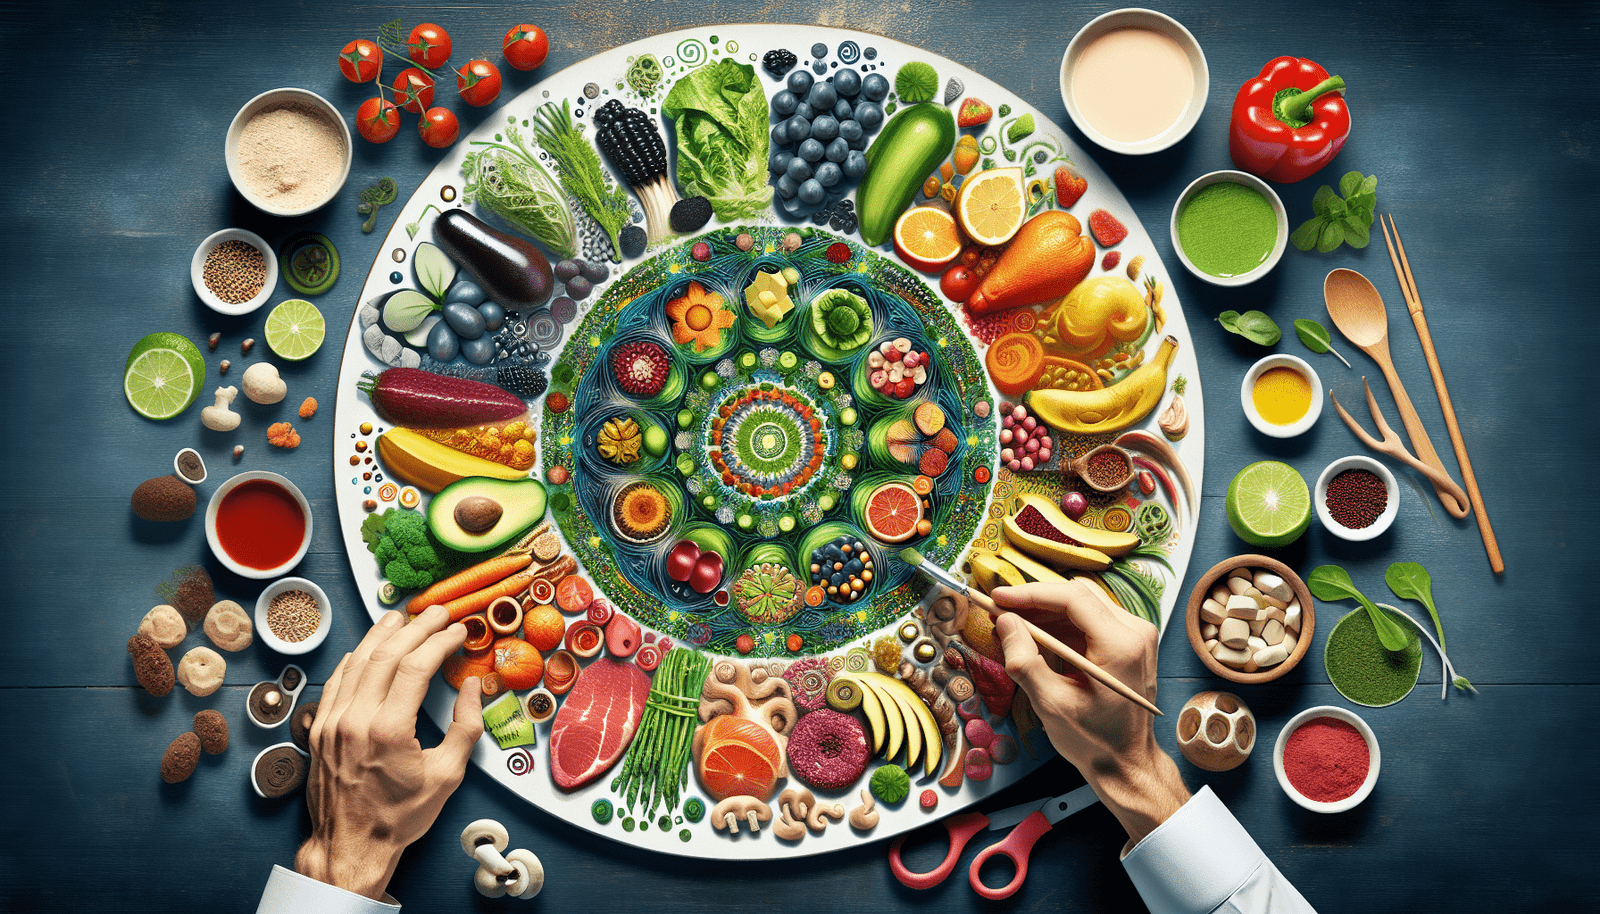 Personalized Nutrition: The Future Of Healthy Eating?